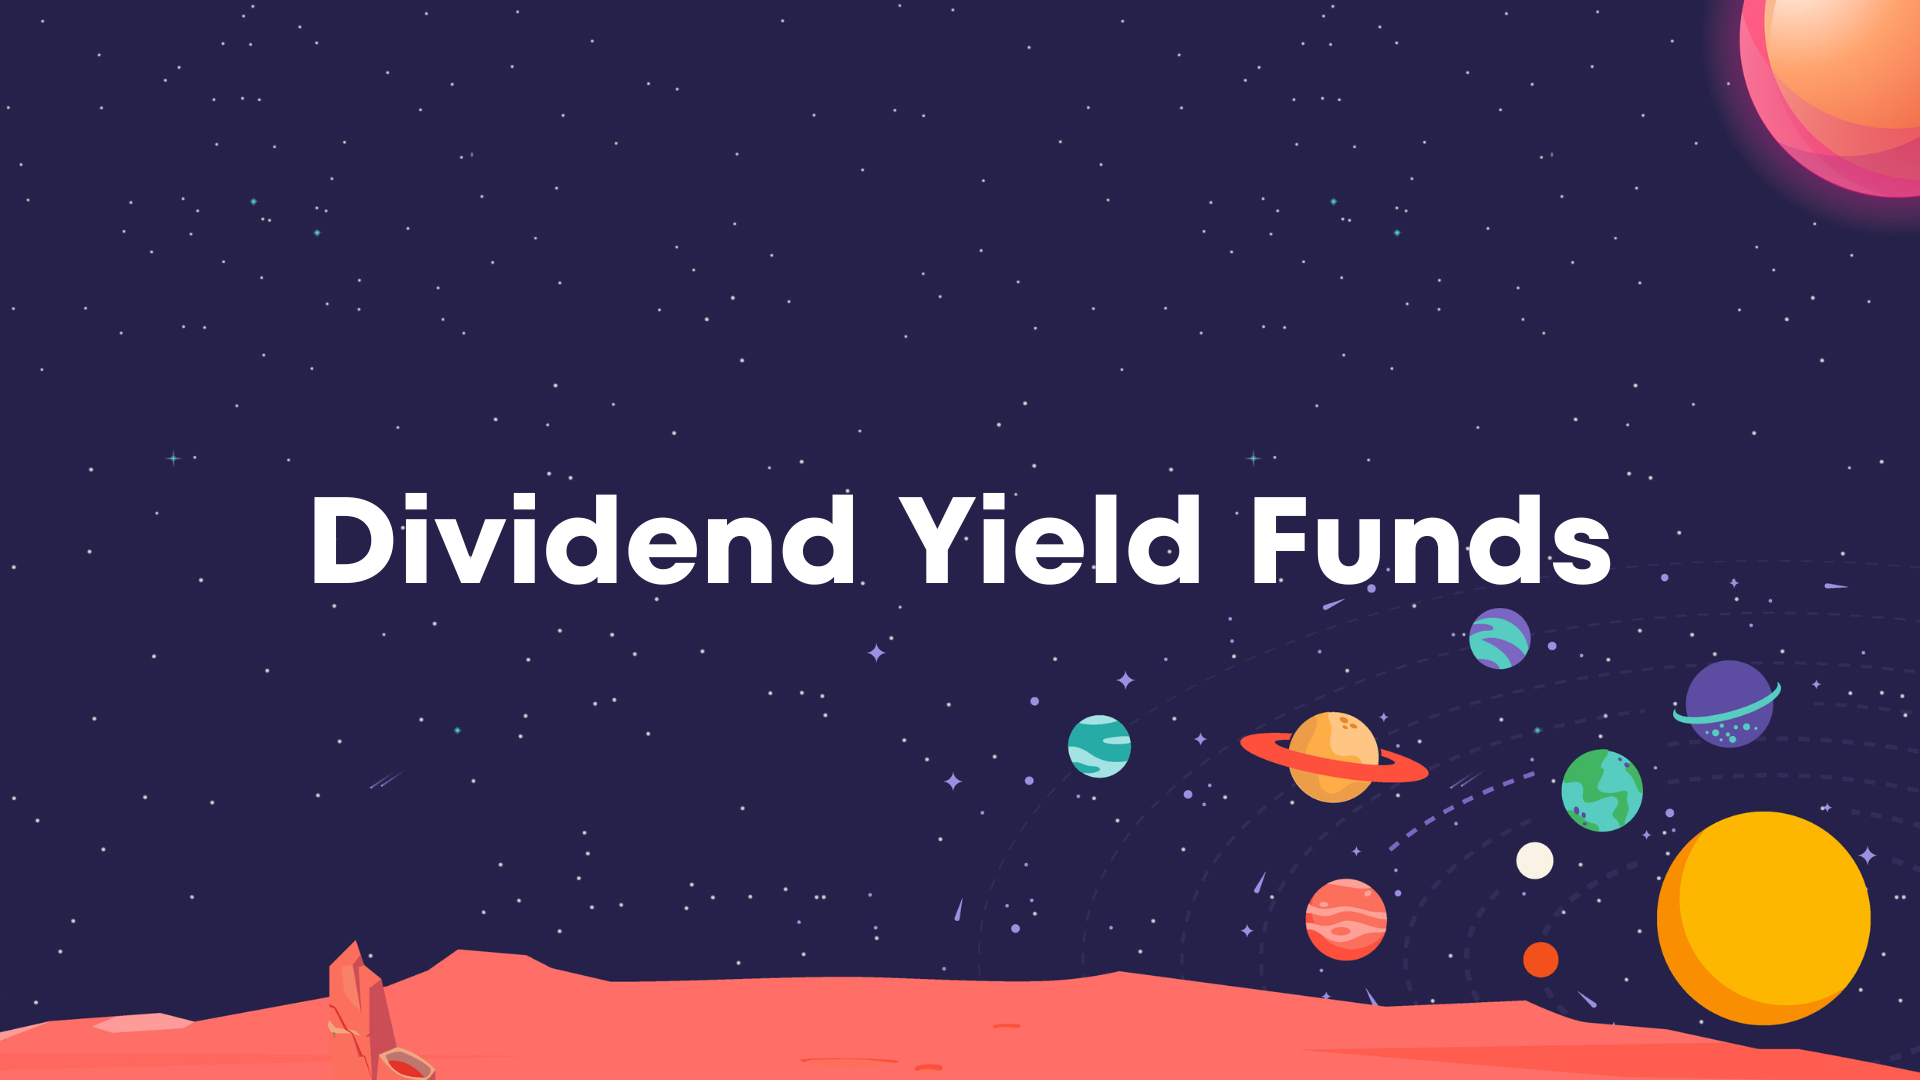 Dividend Yield Funds in India - What Is It And How It Works?